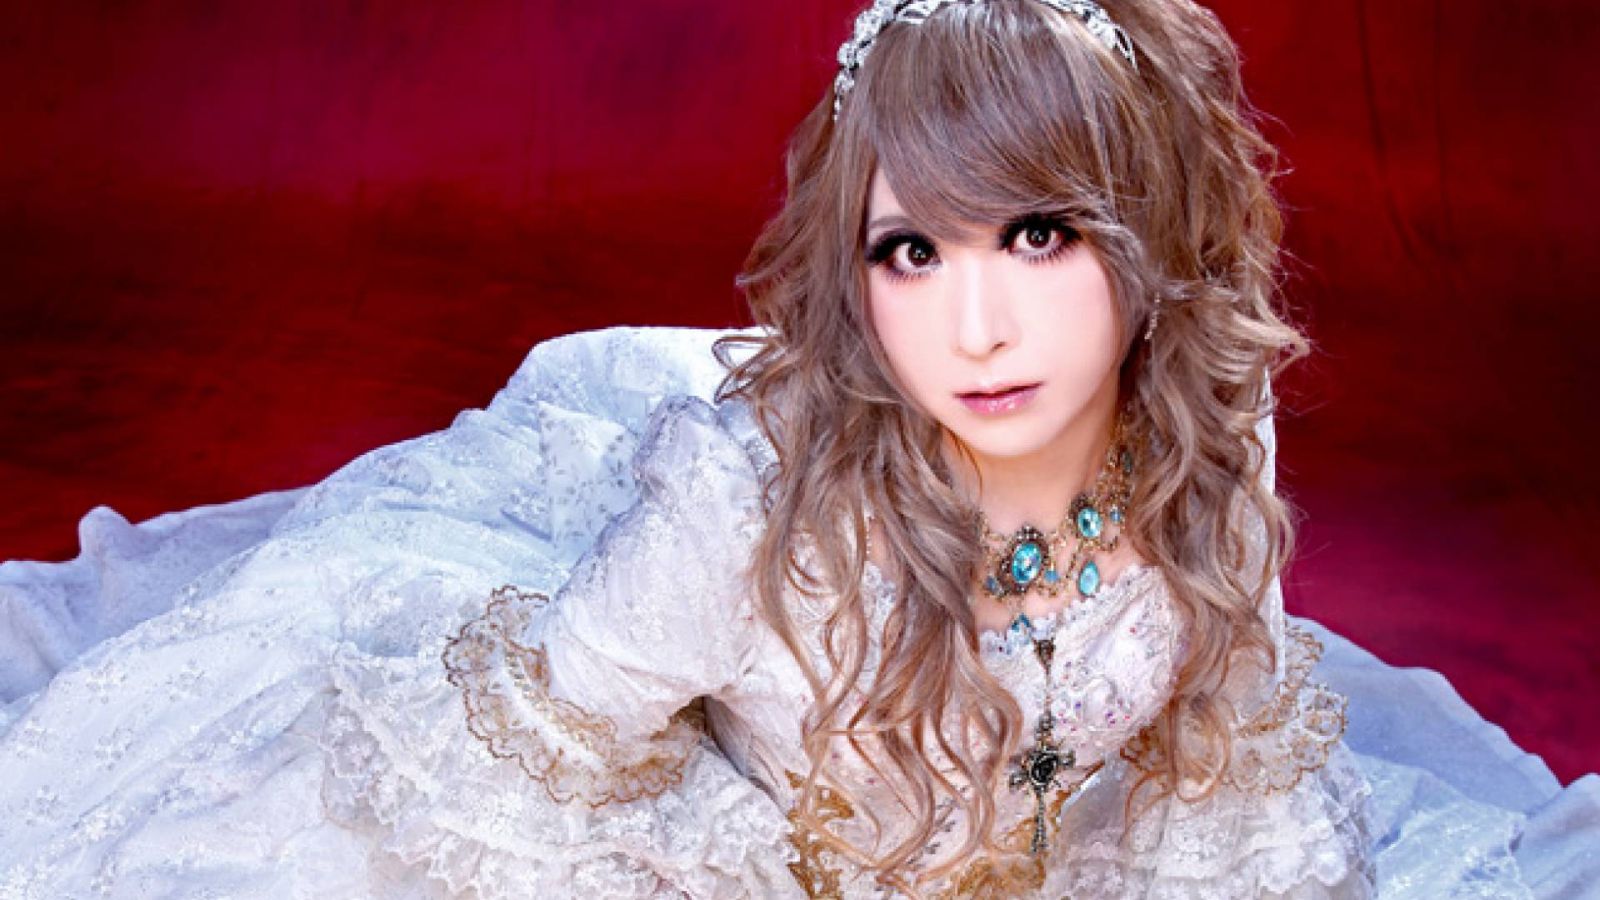 HIZAKI, Fuki, Iwasa Misaki and THE HOOPERS Join HYPER JAPAN Christmas Market Lineup © 2016 GRACE. All rights reserved.